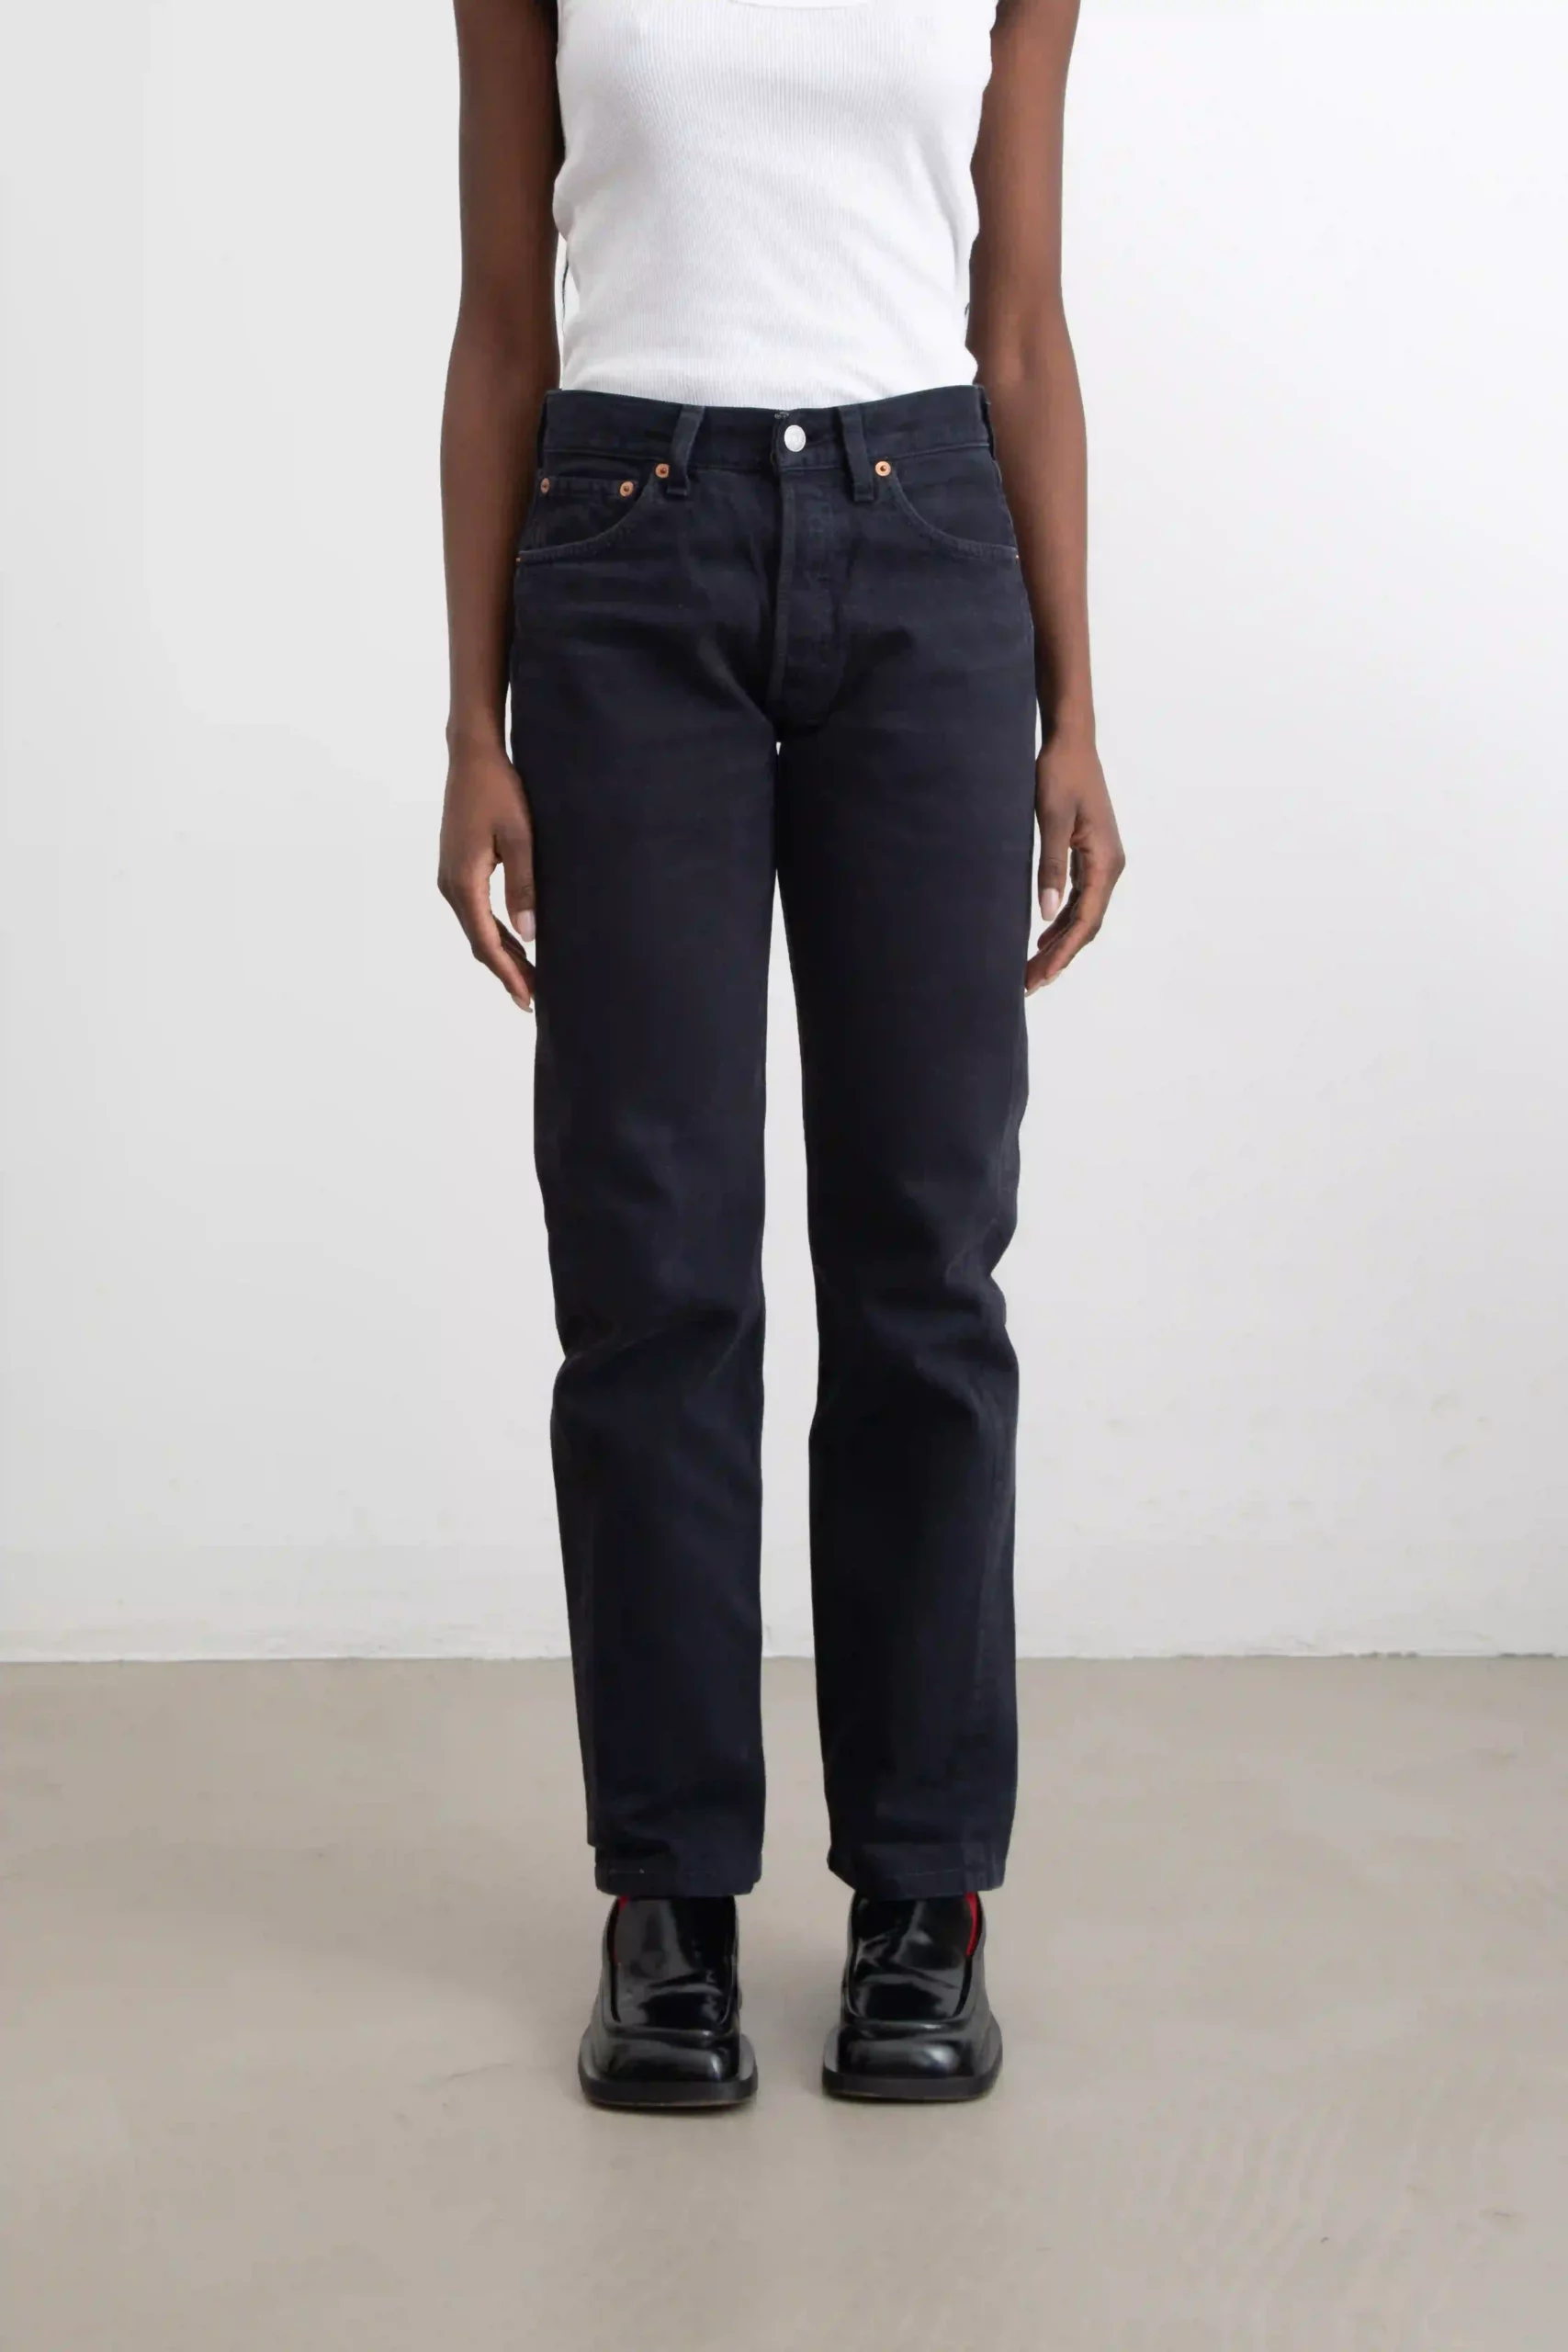 Classic and timeless Levi's model 501 vintage denim pants in black drill, dark wash. Strong black stitching. Five pockets. At the end of the right back pocket is the iconic red Levi's tab.